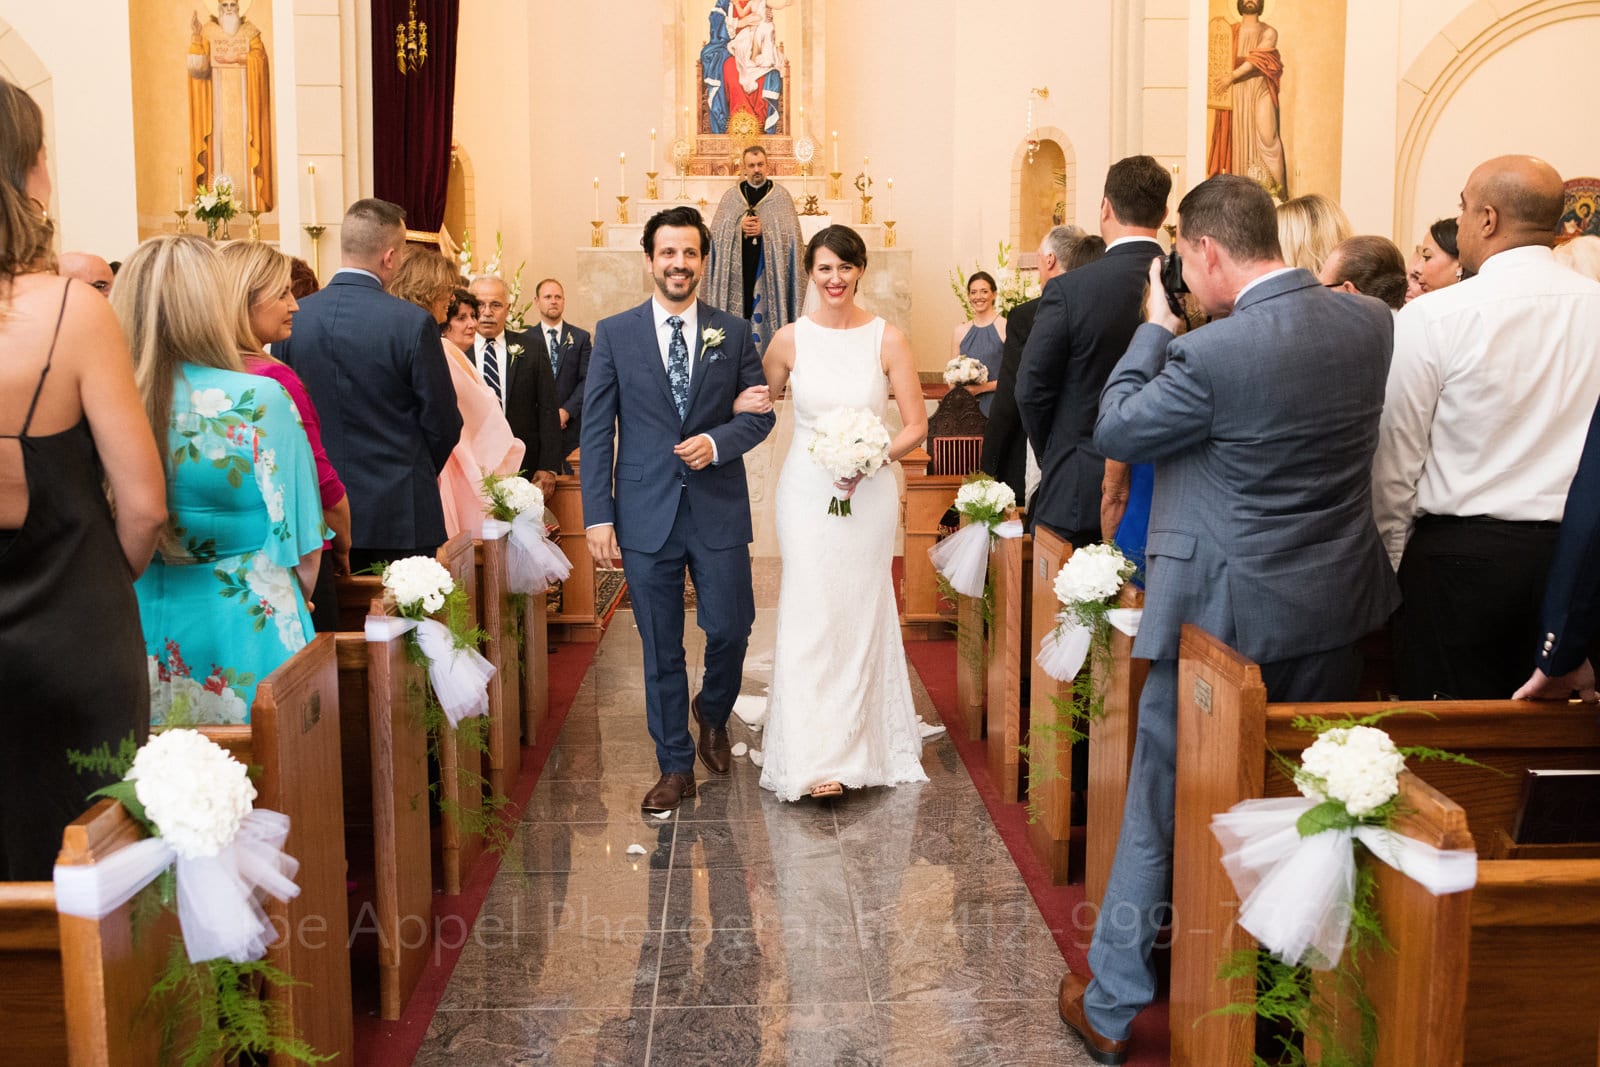 A smiling bride and groom walk down the aisle at the end of their wedding ceremony at St. Mary's Armenian Apostolic Church in Washington DC.